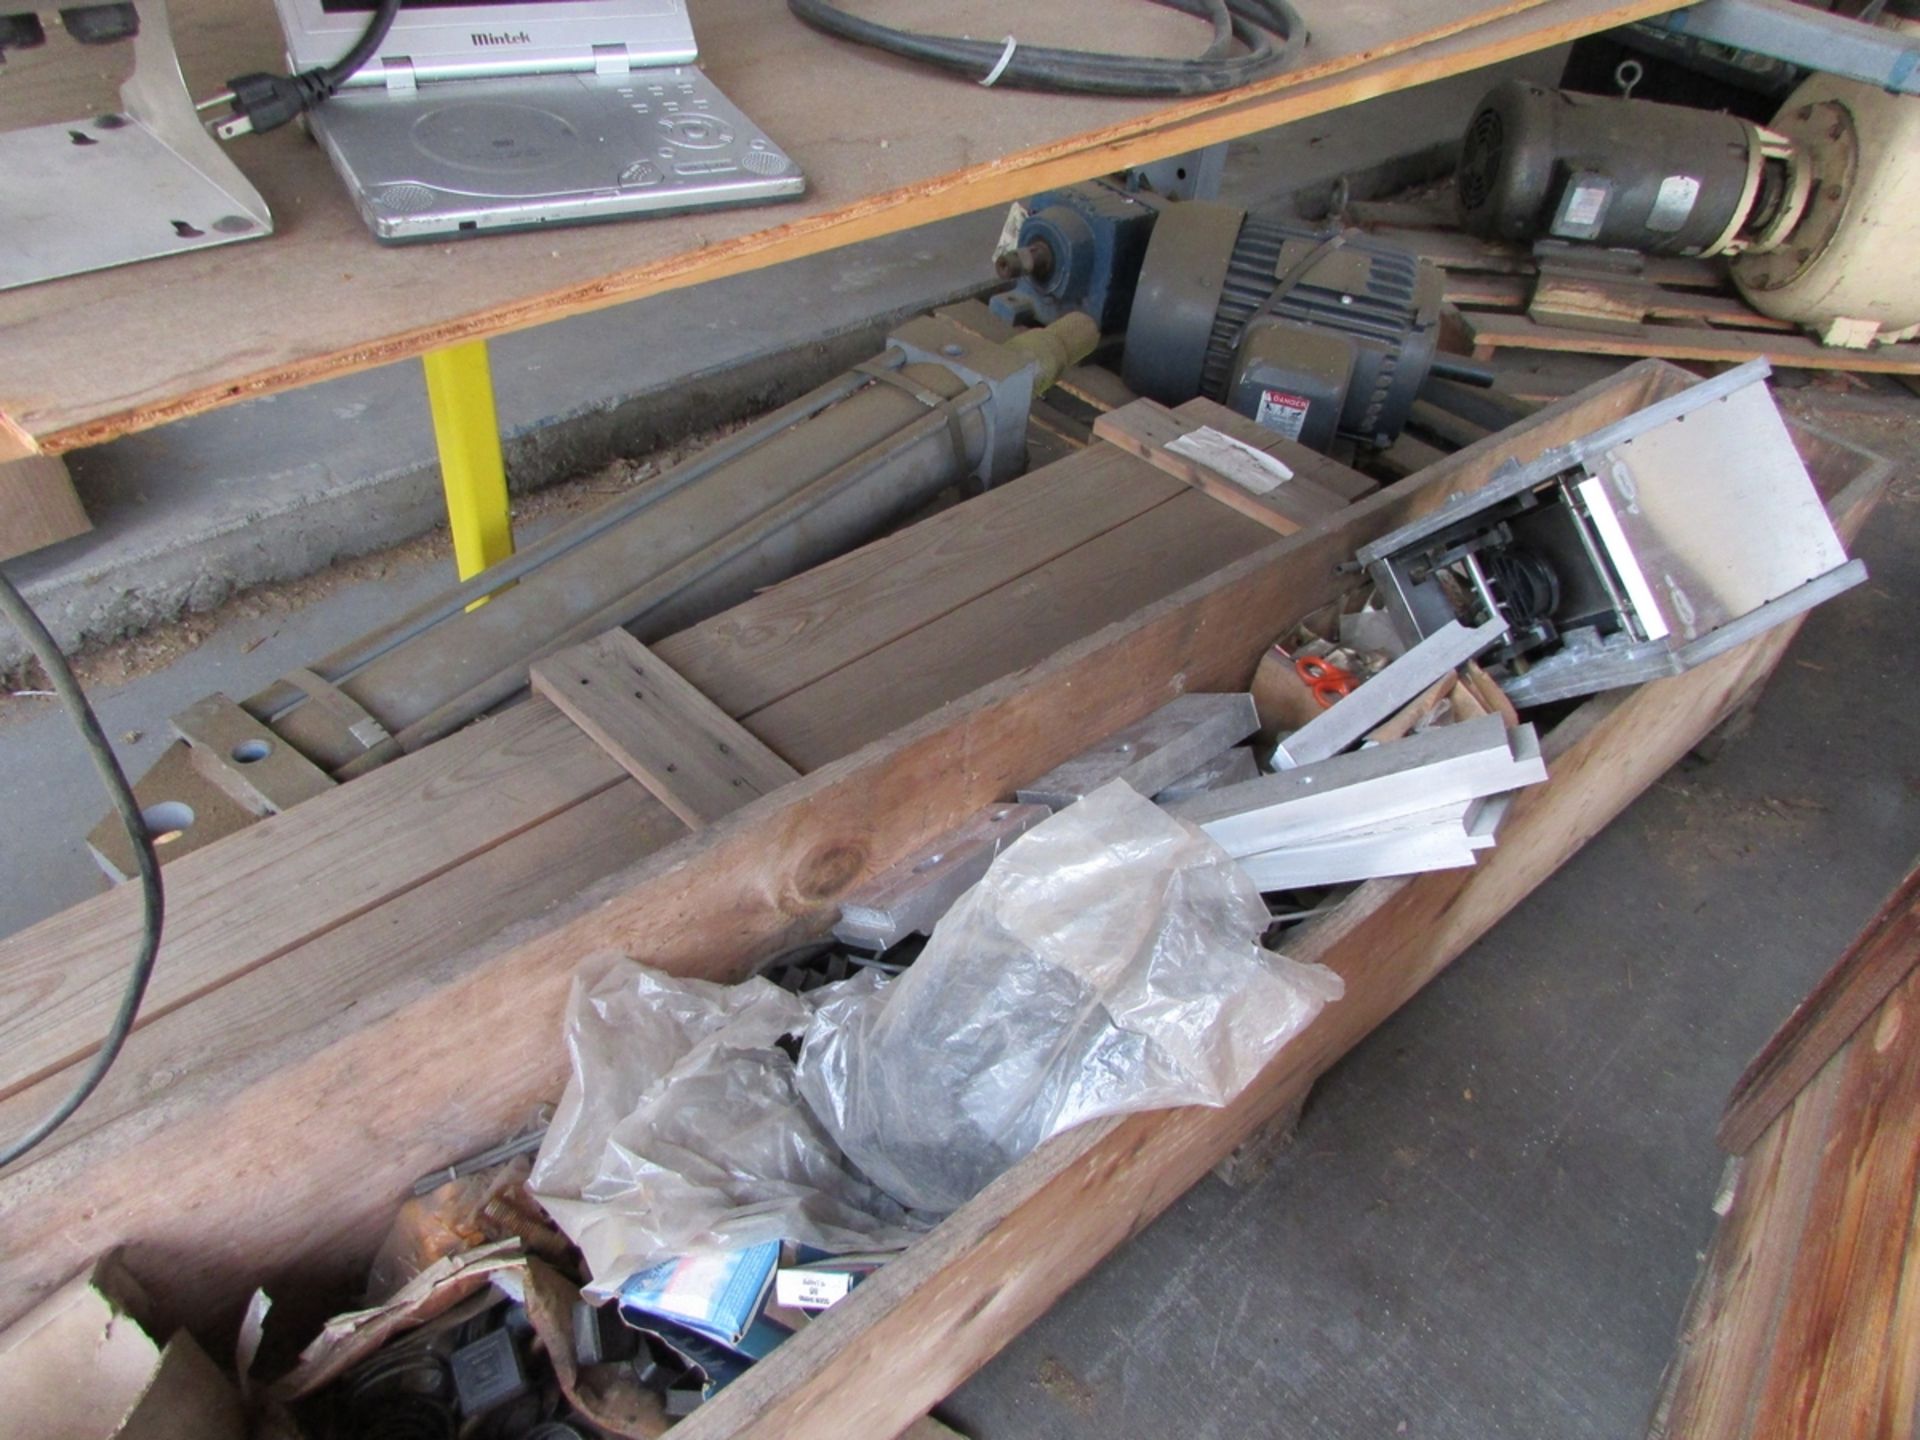 LOT - (10) PALLETS OF ASSORTED SPARE PARTS, TO INCLUDE: MOTORS, SERVOS, PUMPS, MISC. PARTS, ETC. - Image 2 of 21